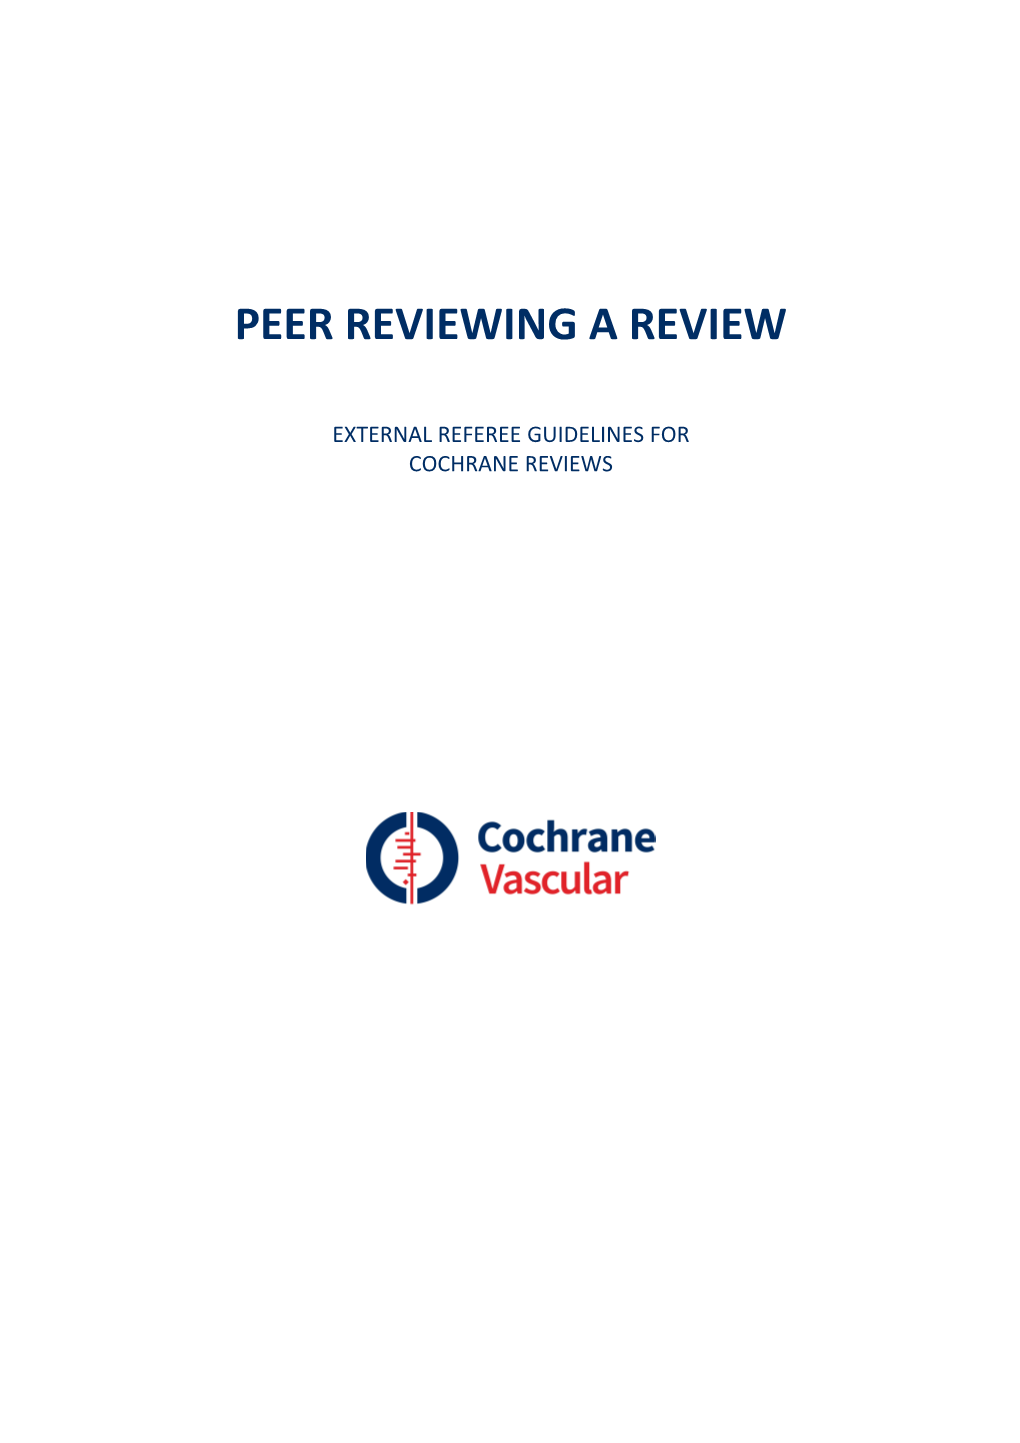 Peer Reviewing a Review